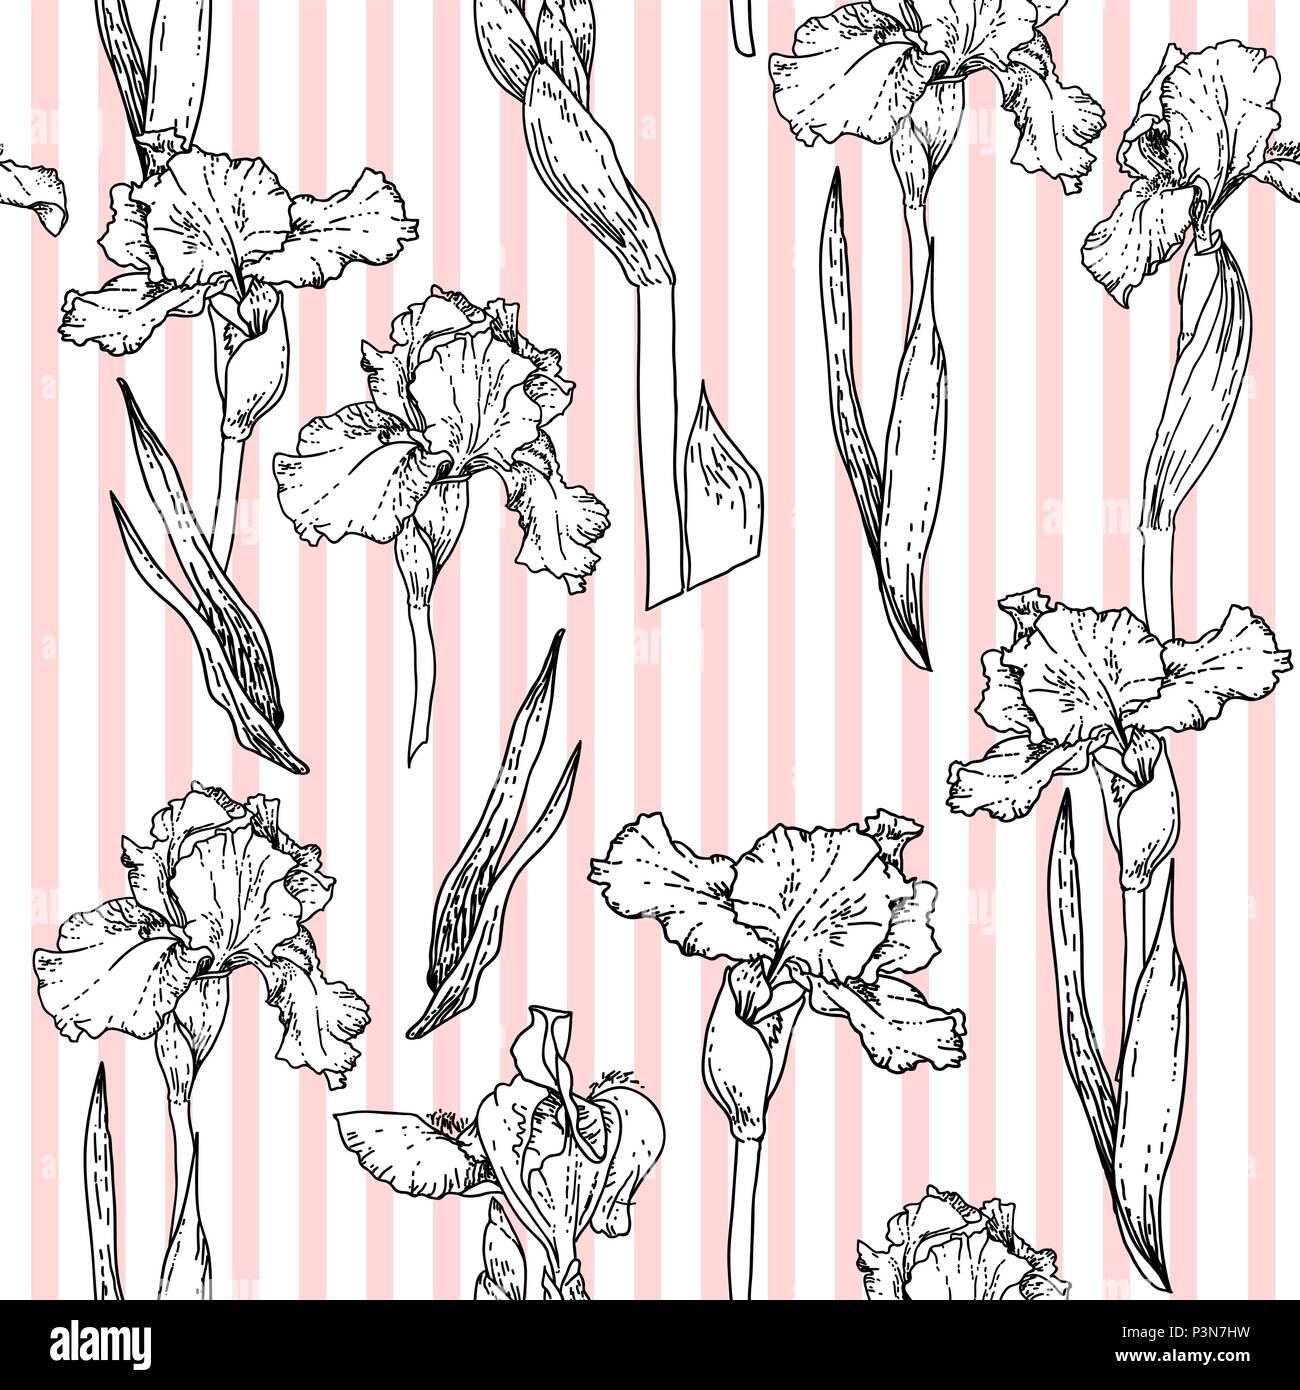 Iris flower beauty Stock Vector Images - Page 3 - Alamy